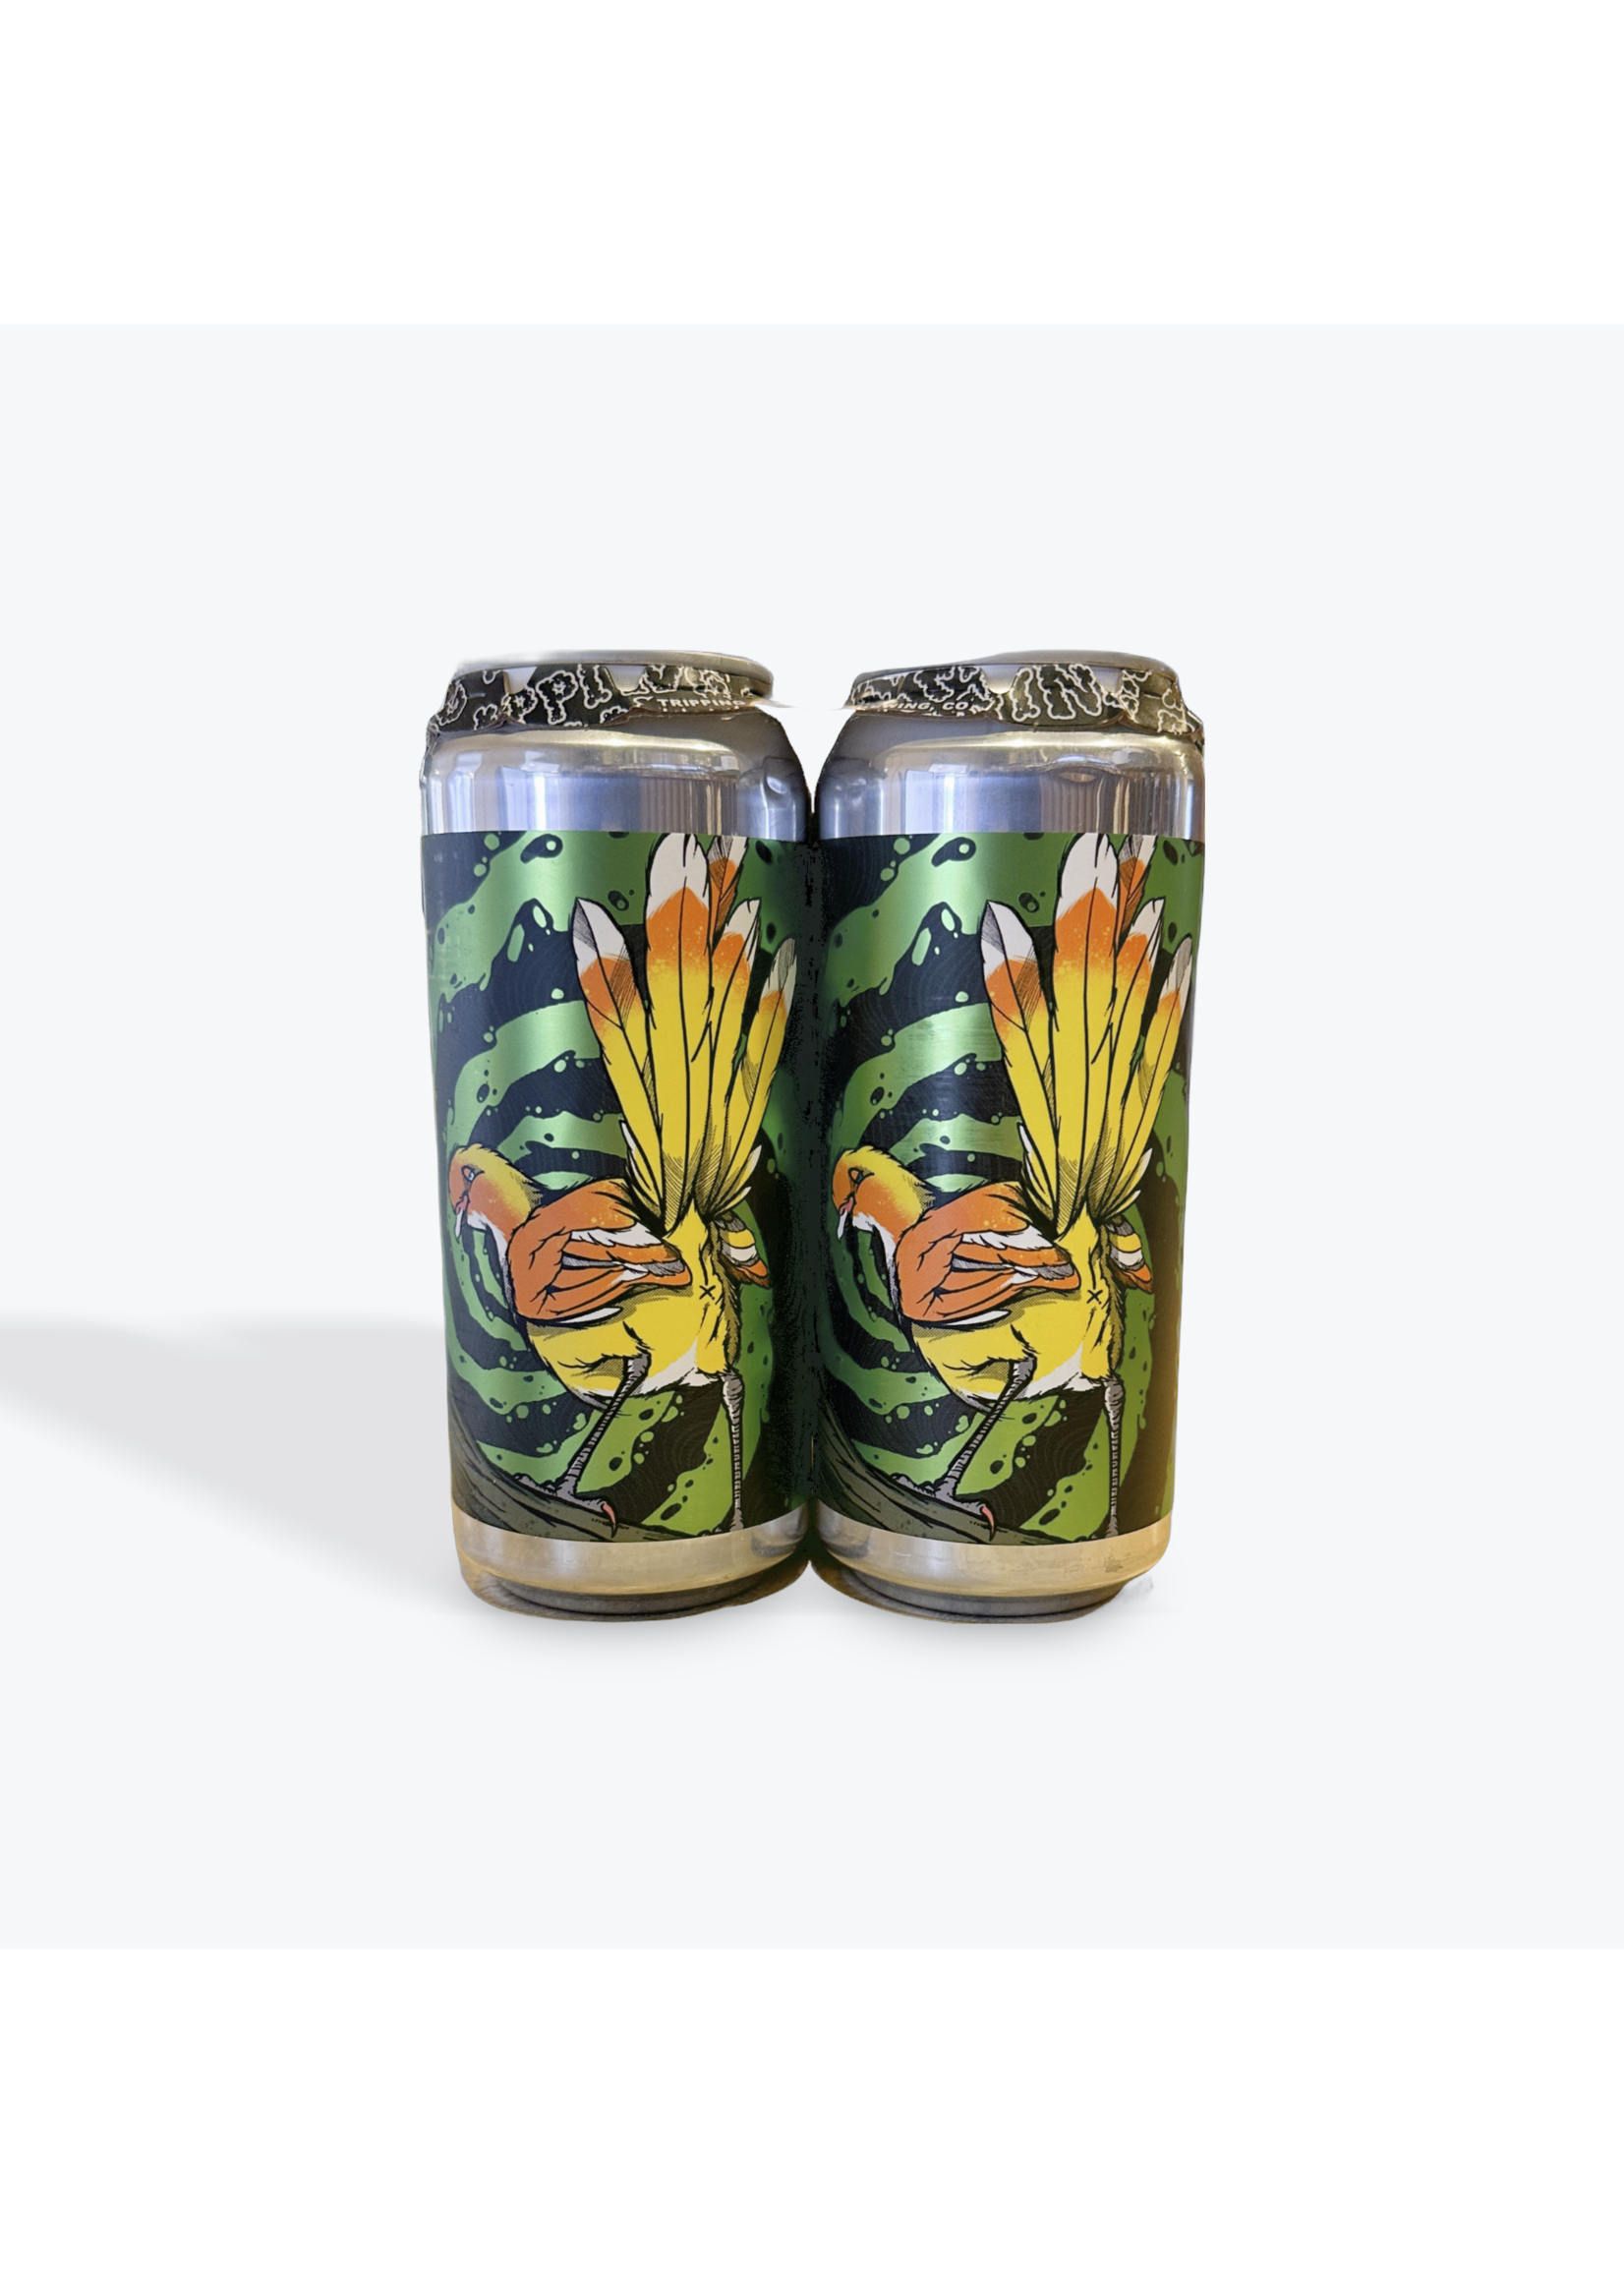 Tripping Animals Brewery Beer 4Pack - Tripping Animals Brewery/Perennial - Shake Ya Tailfeather